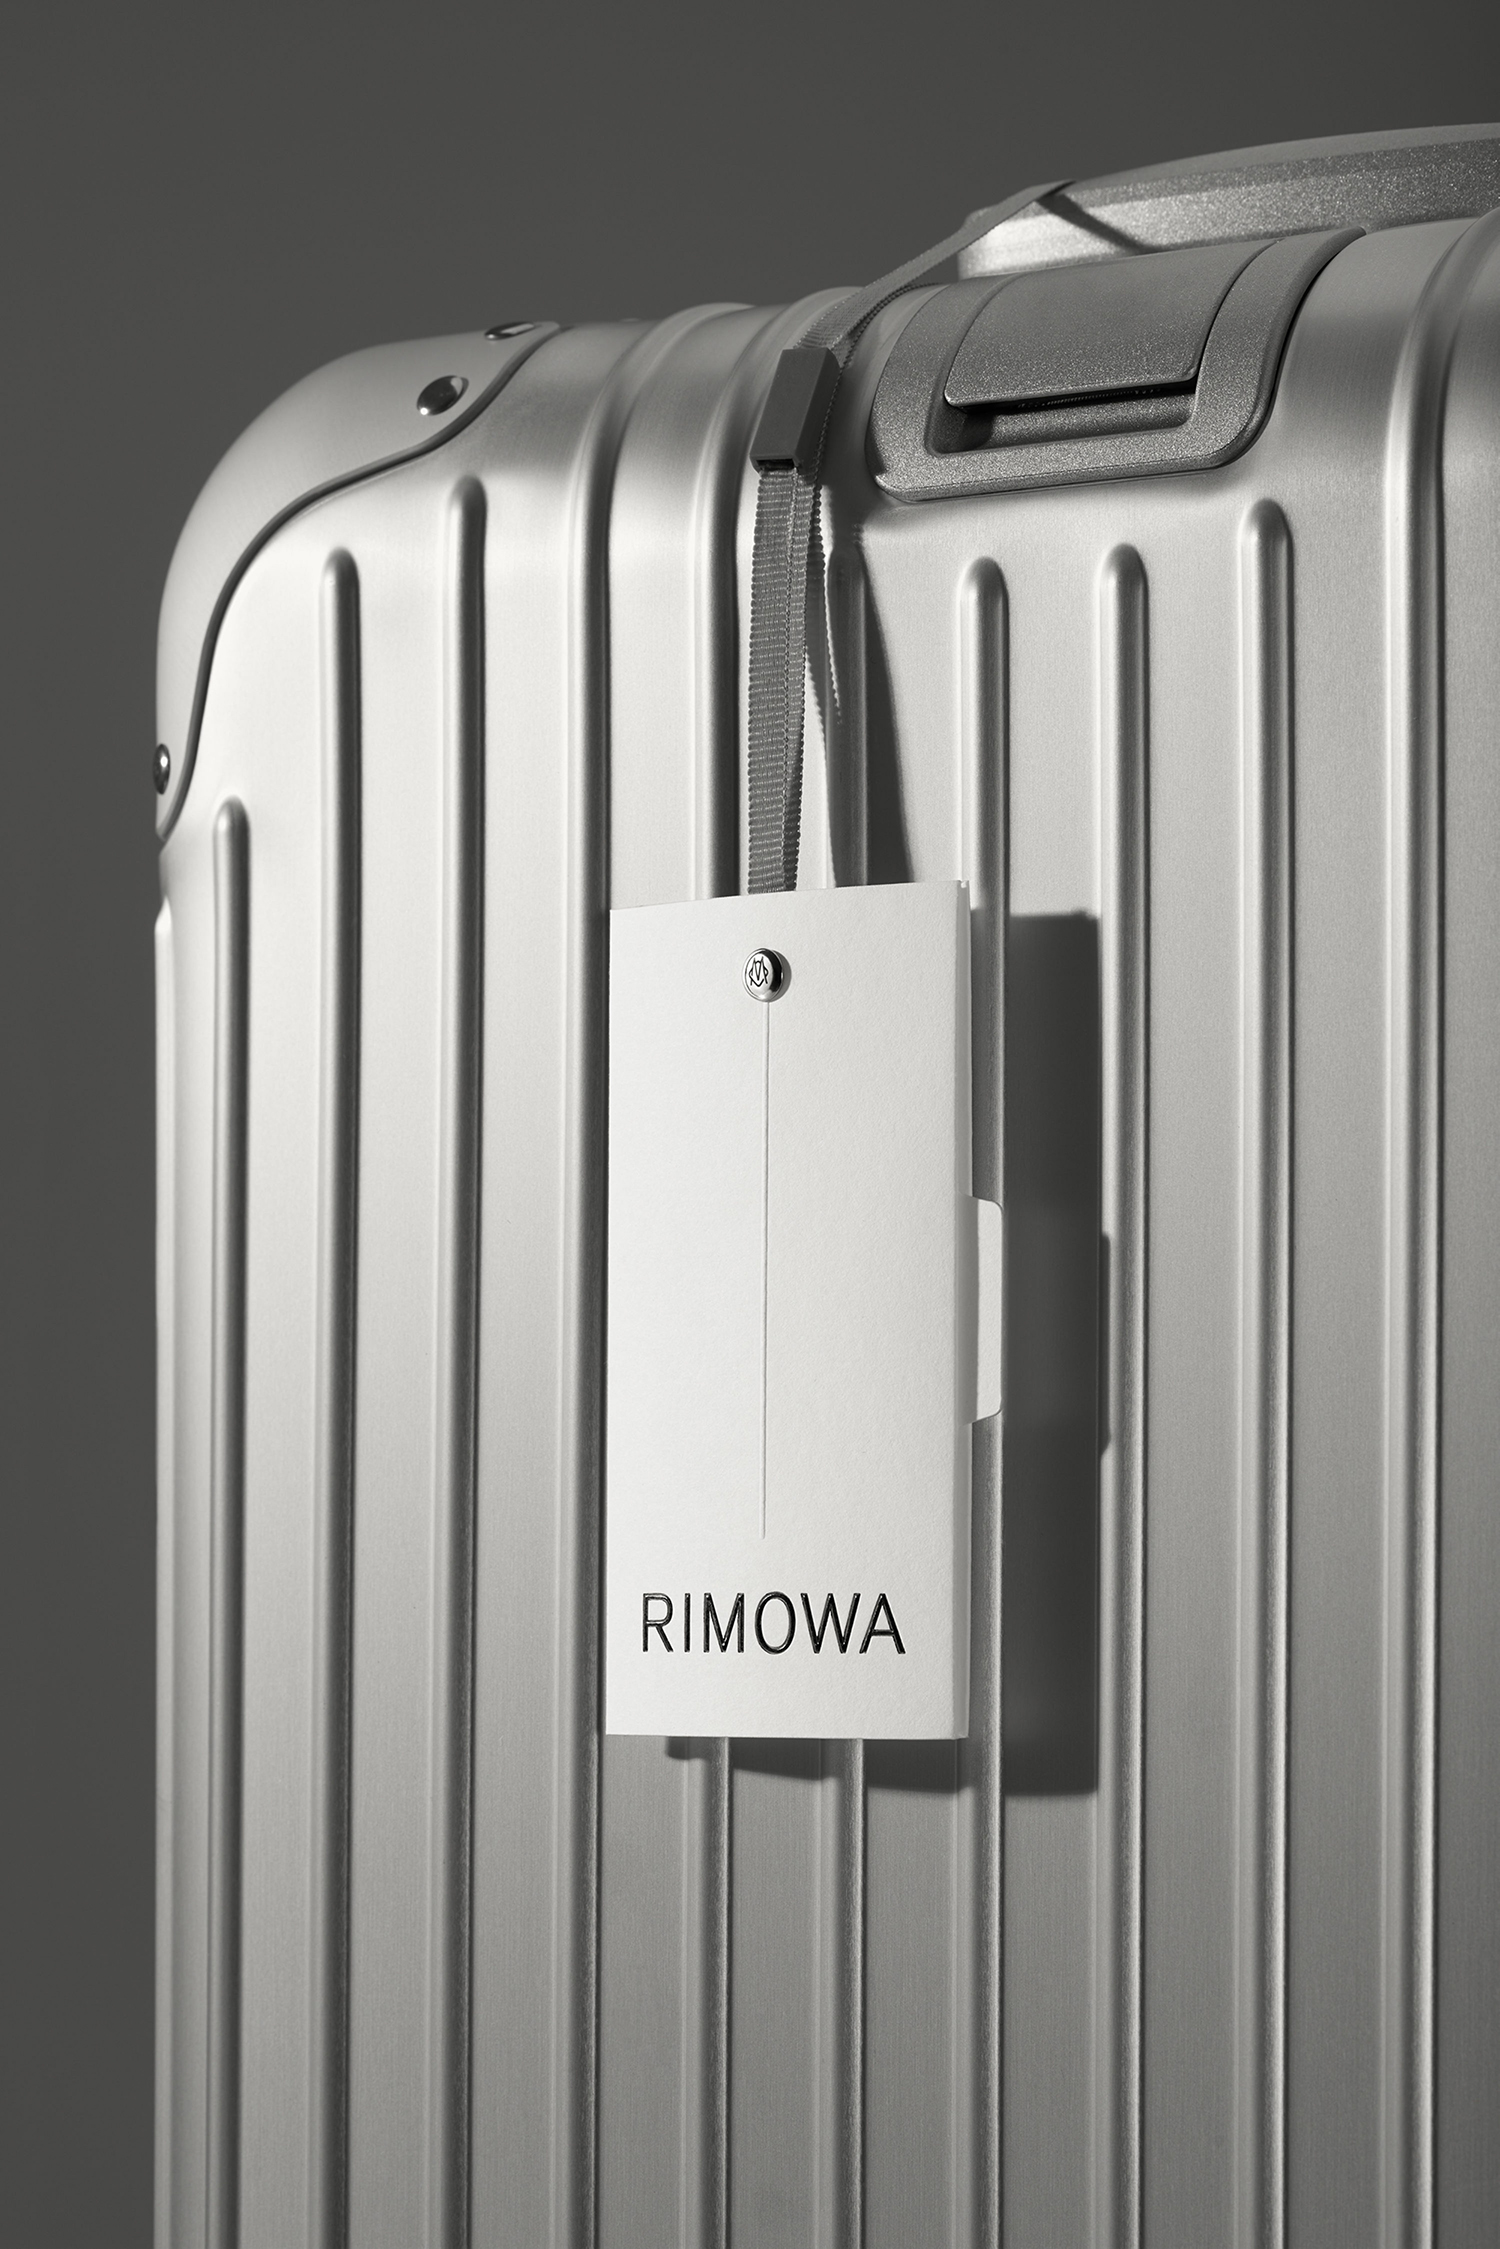 Monogram, type style, pattern and packaging by designed by Commission studio for functional luxury luggage manufacturer Rimowa